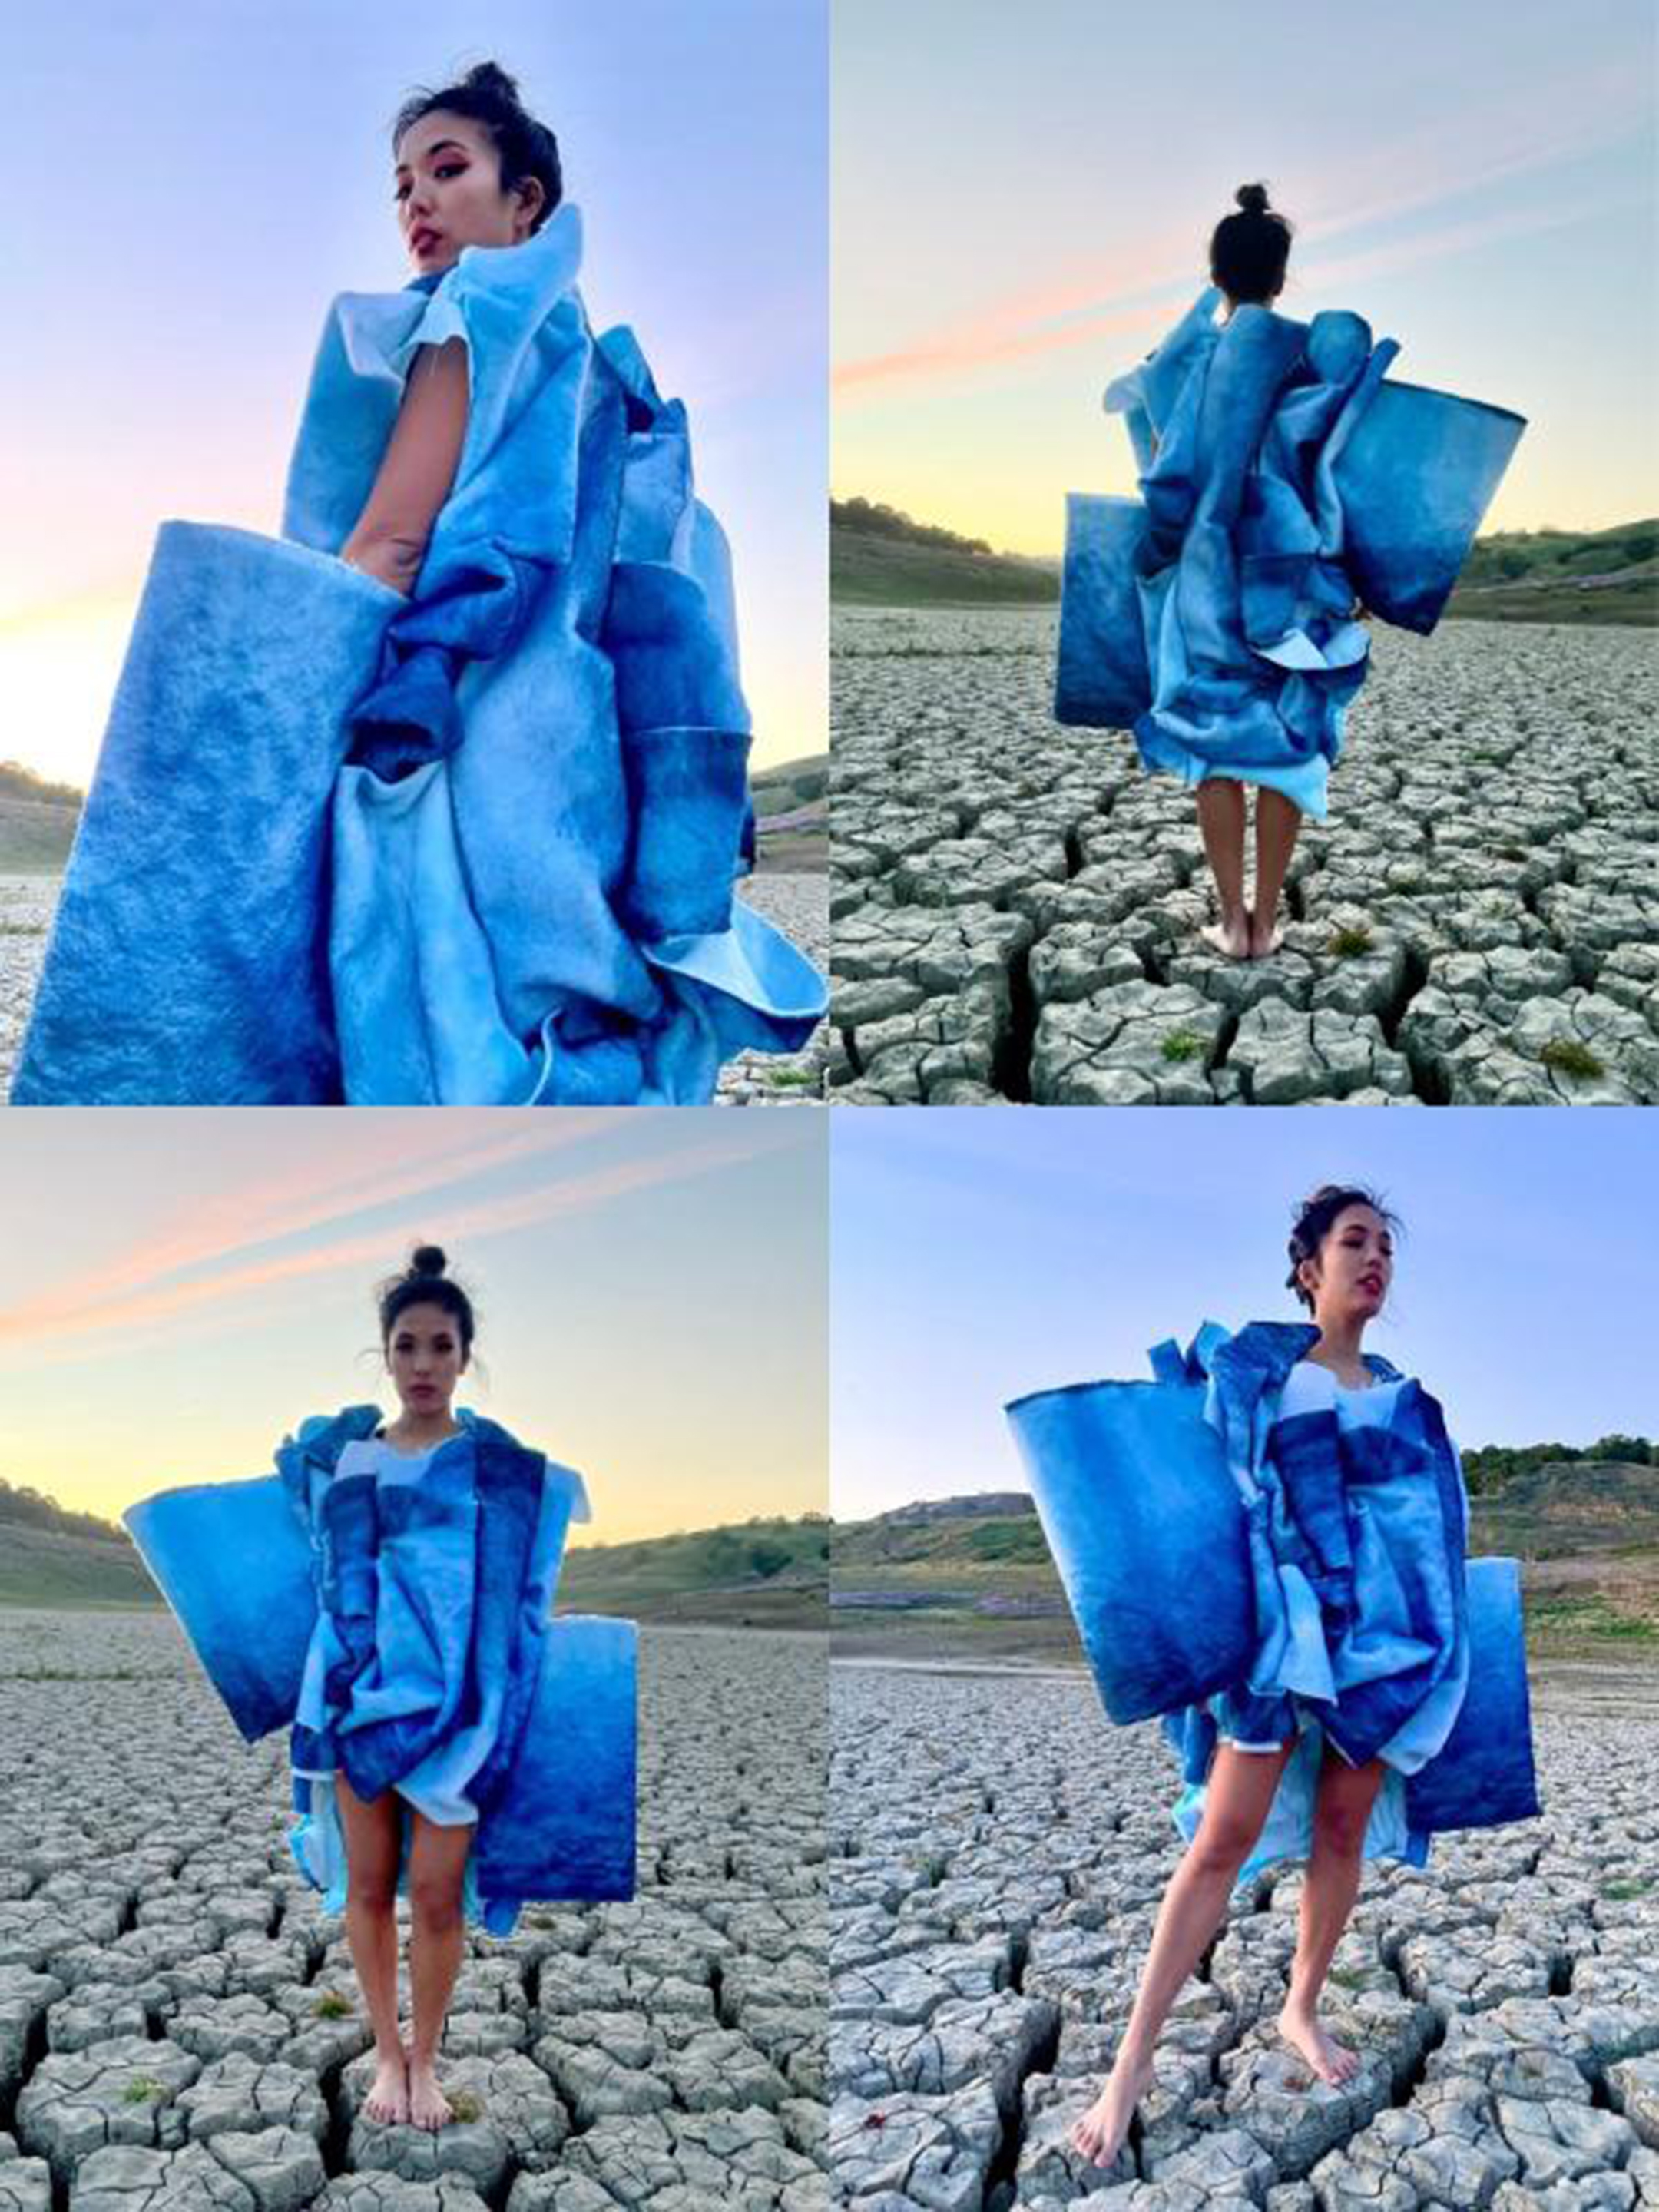 Grid of four images of woman in blue costume seen in different poses